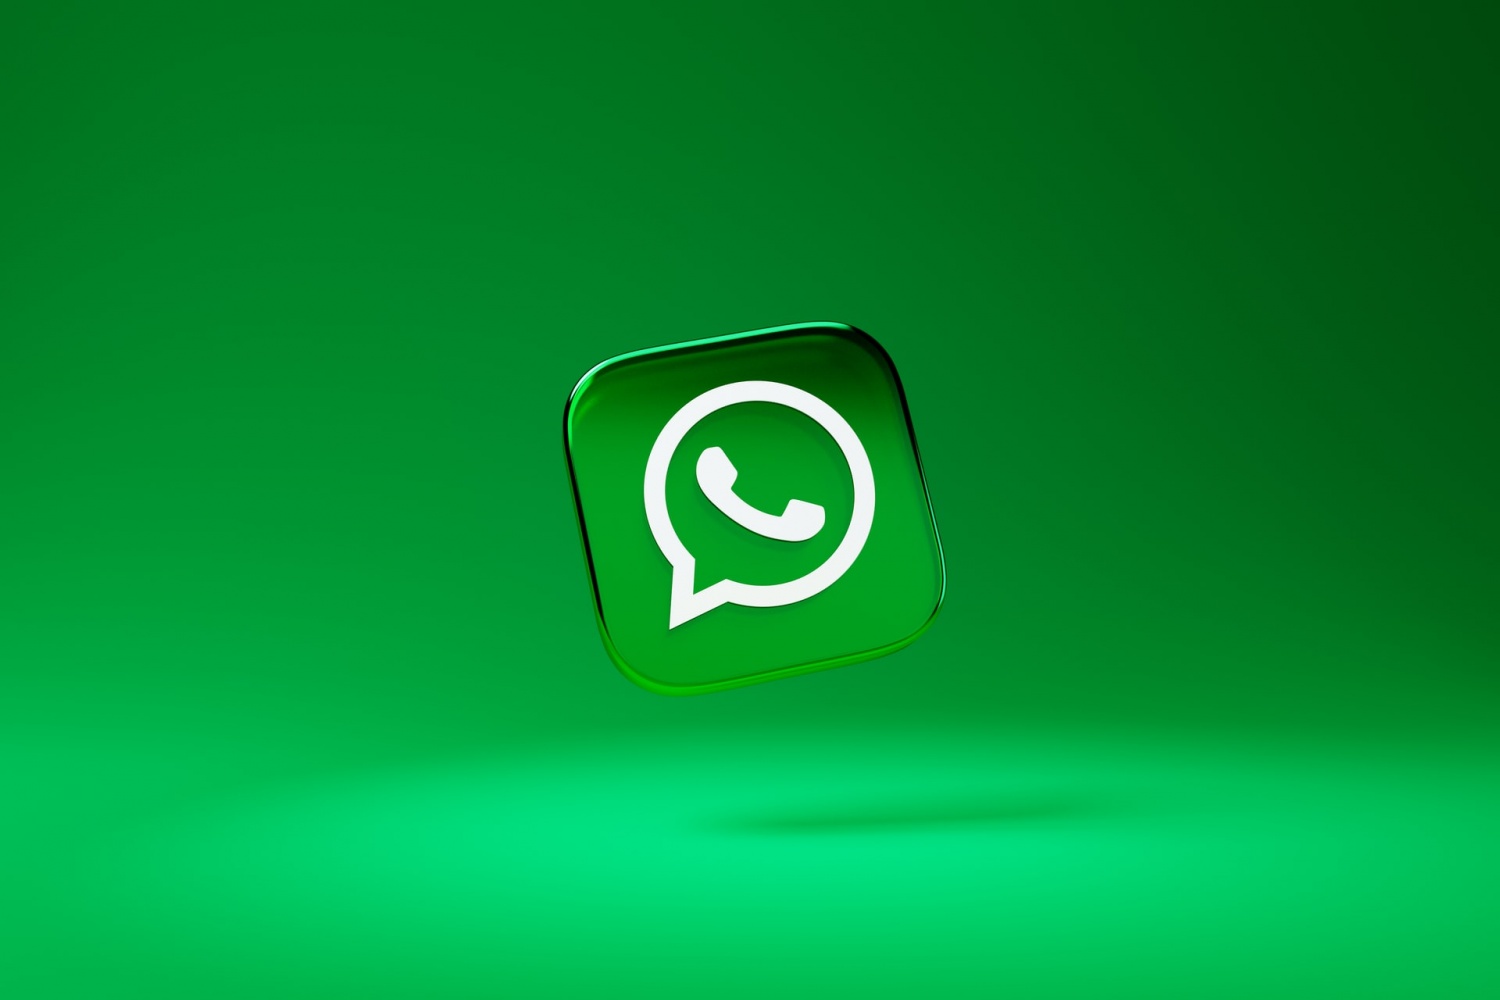 How to See Status Without Them Knowing on Whatsapp in 4 Ways